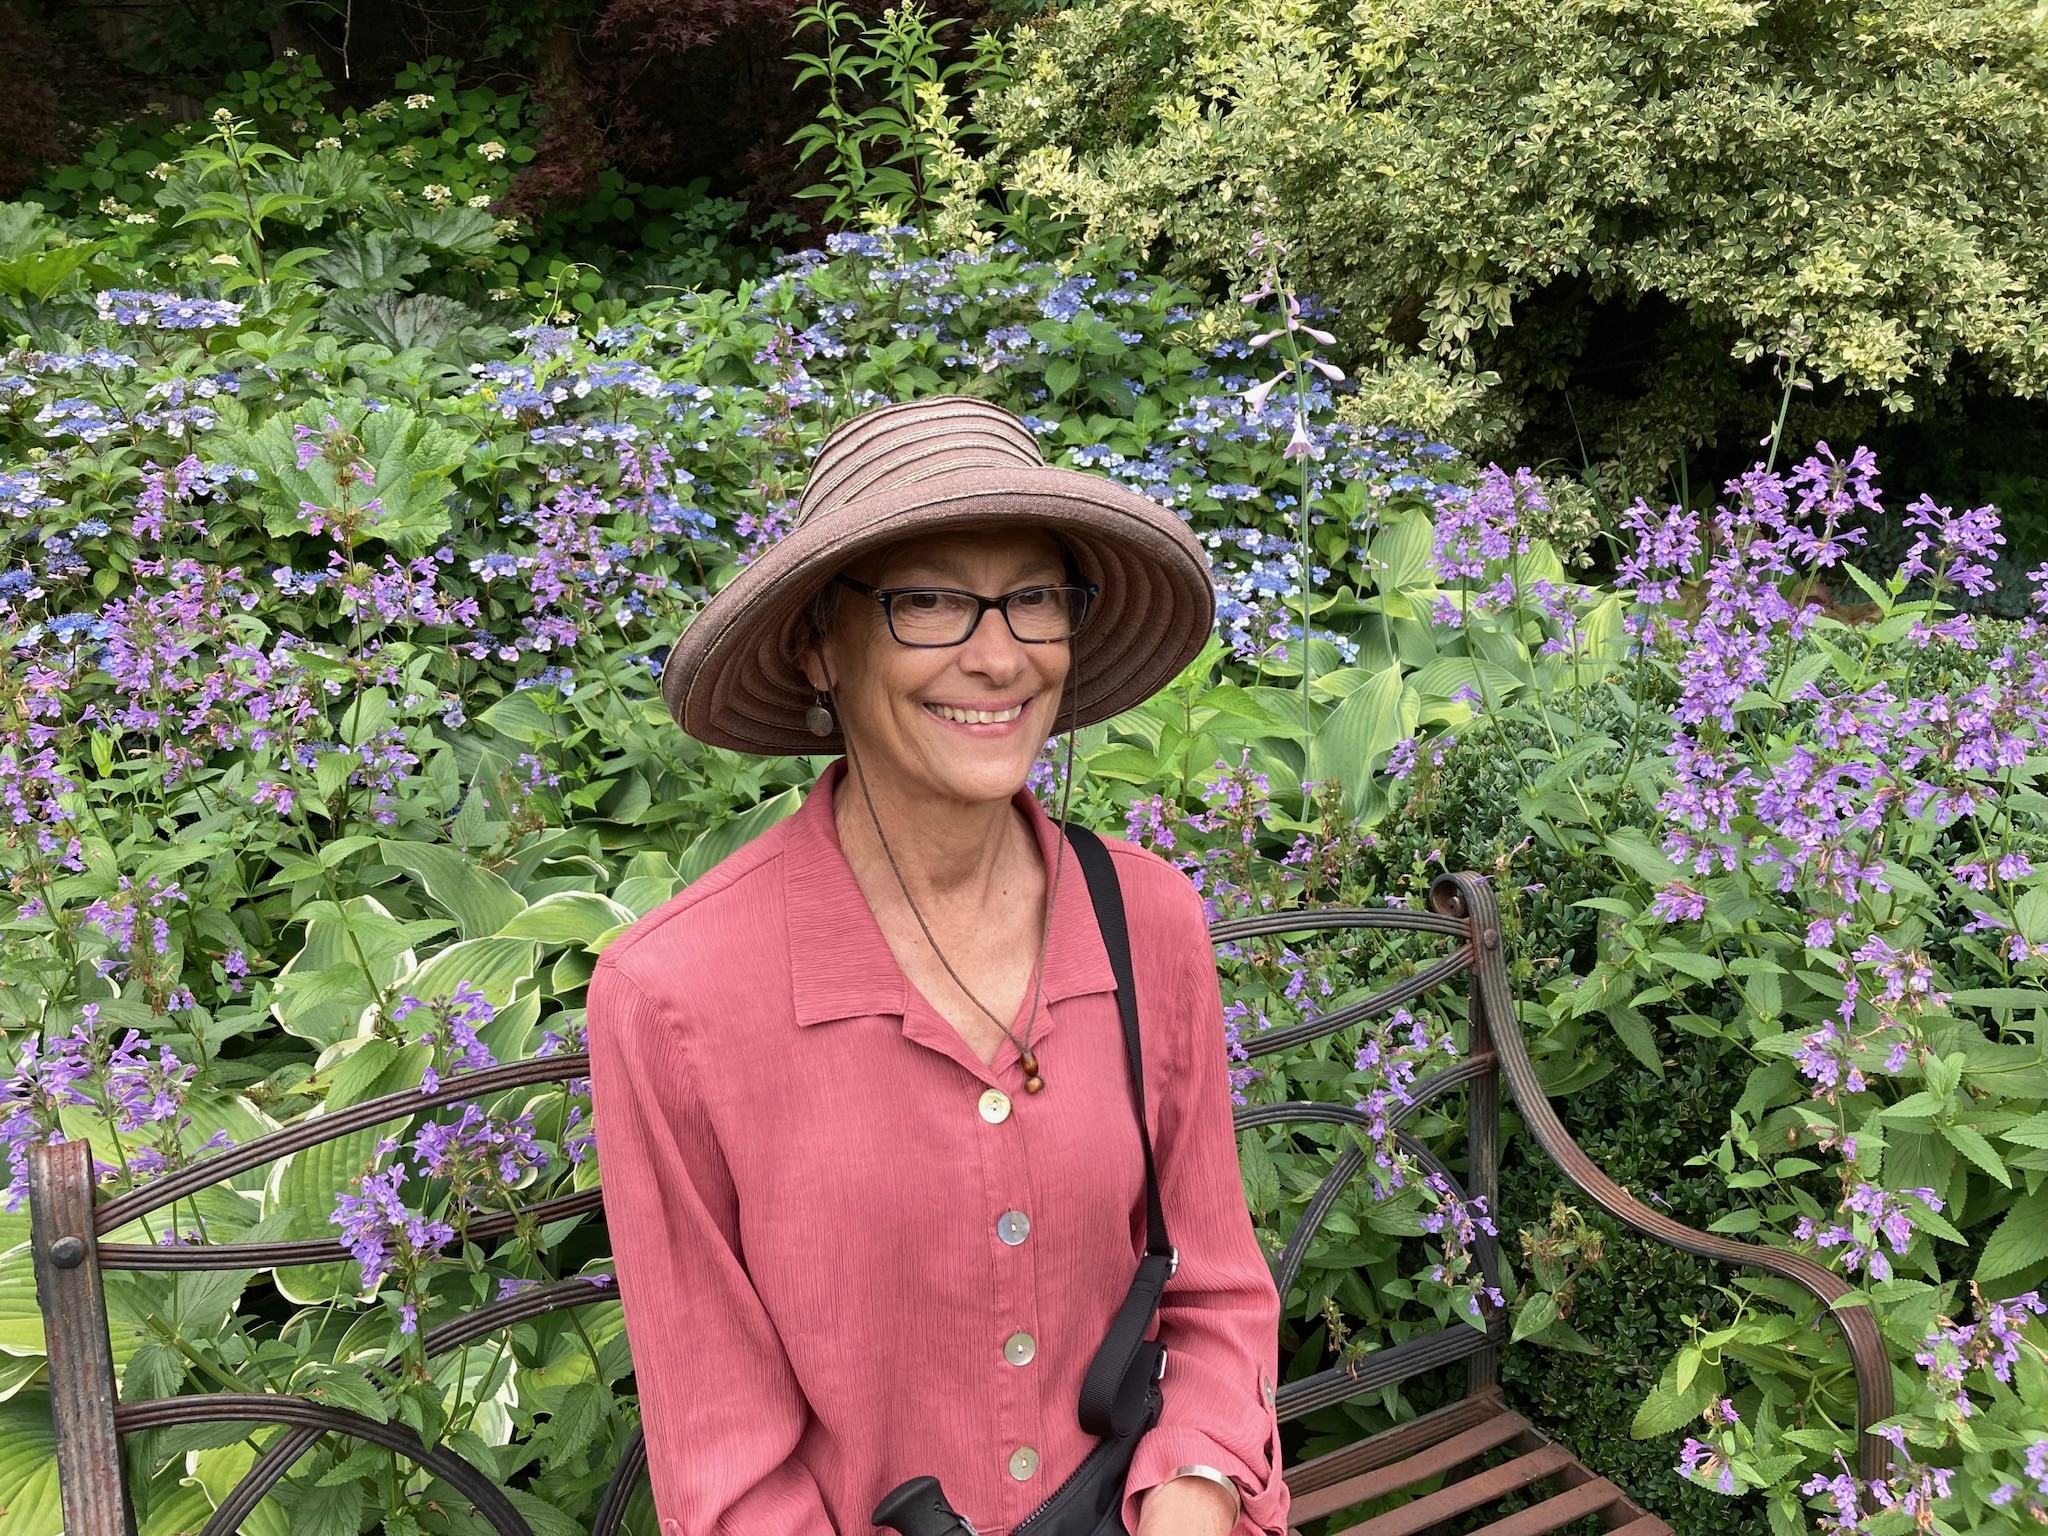 Photo of Jessica Kogel standing in front of purple wild flowers. She is smiling and wearing a pink short and large hat.